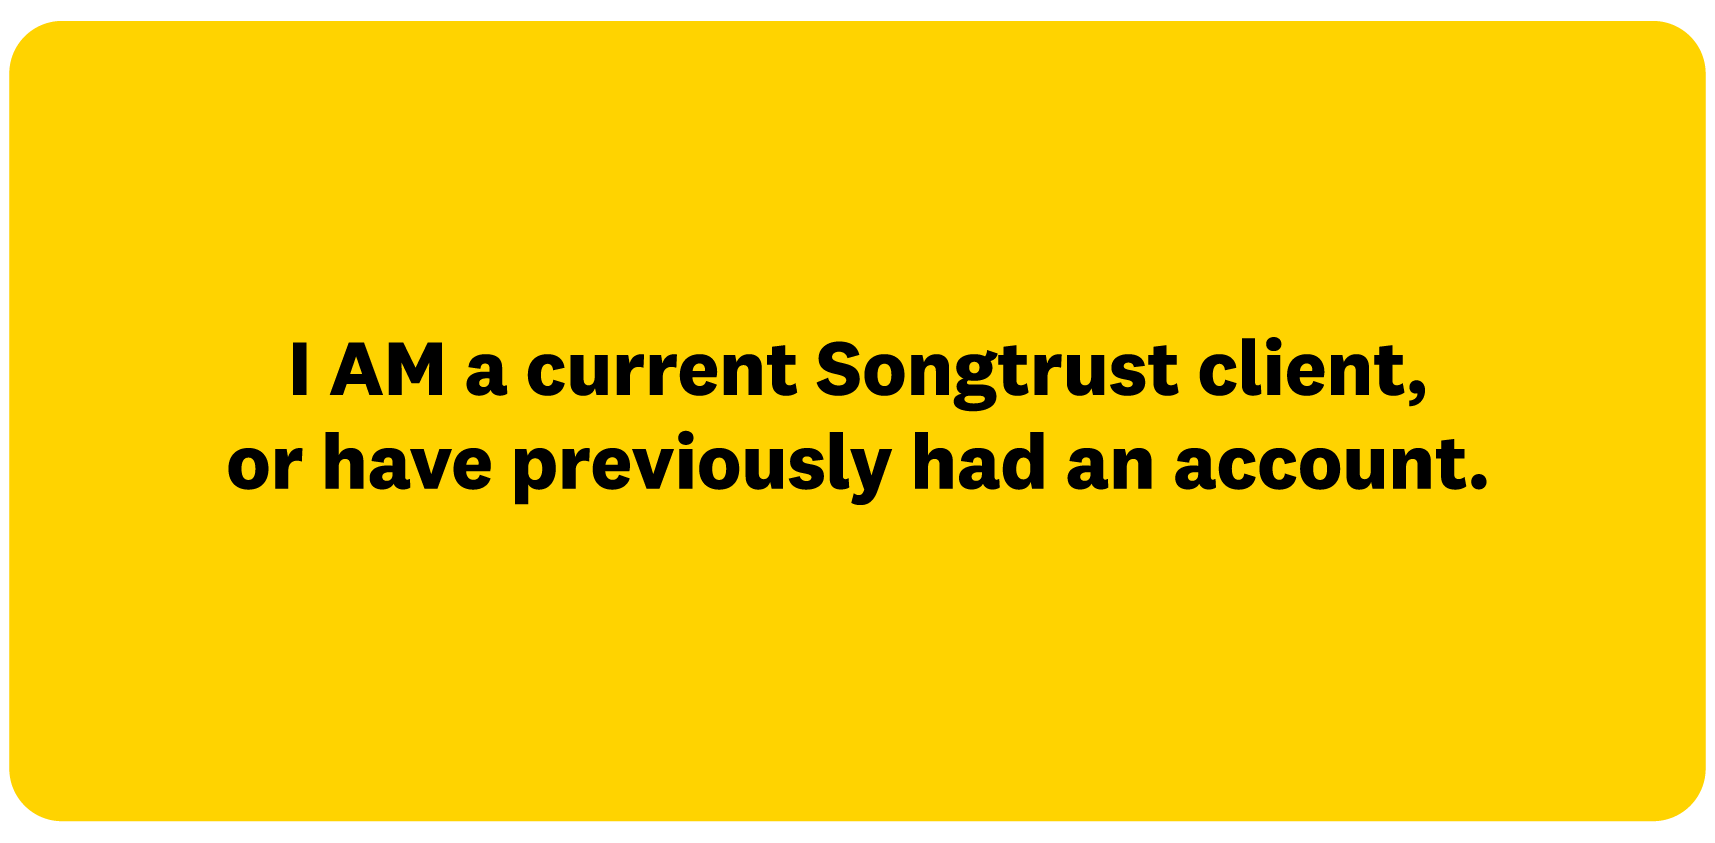 Songtrust Client - Support Form